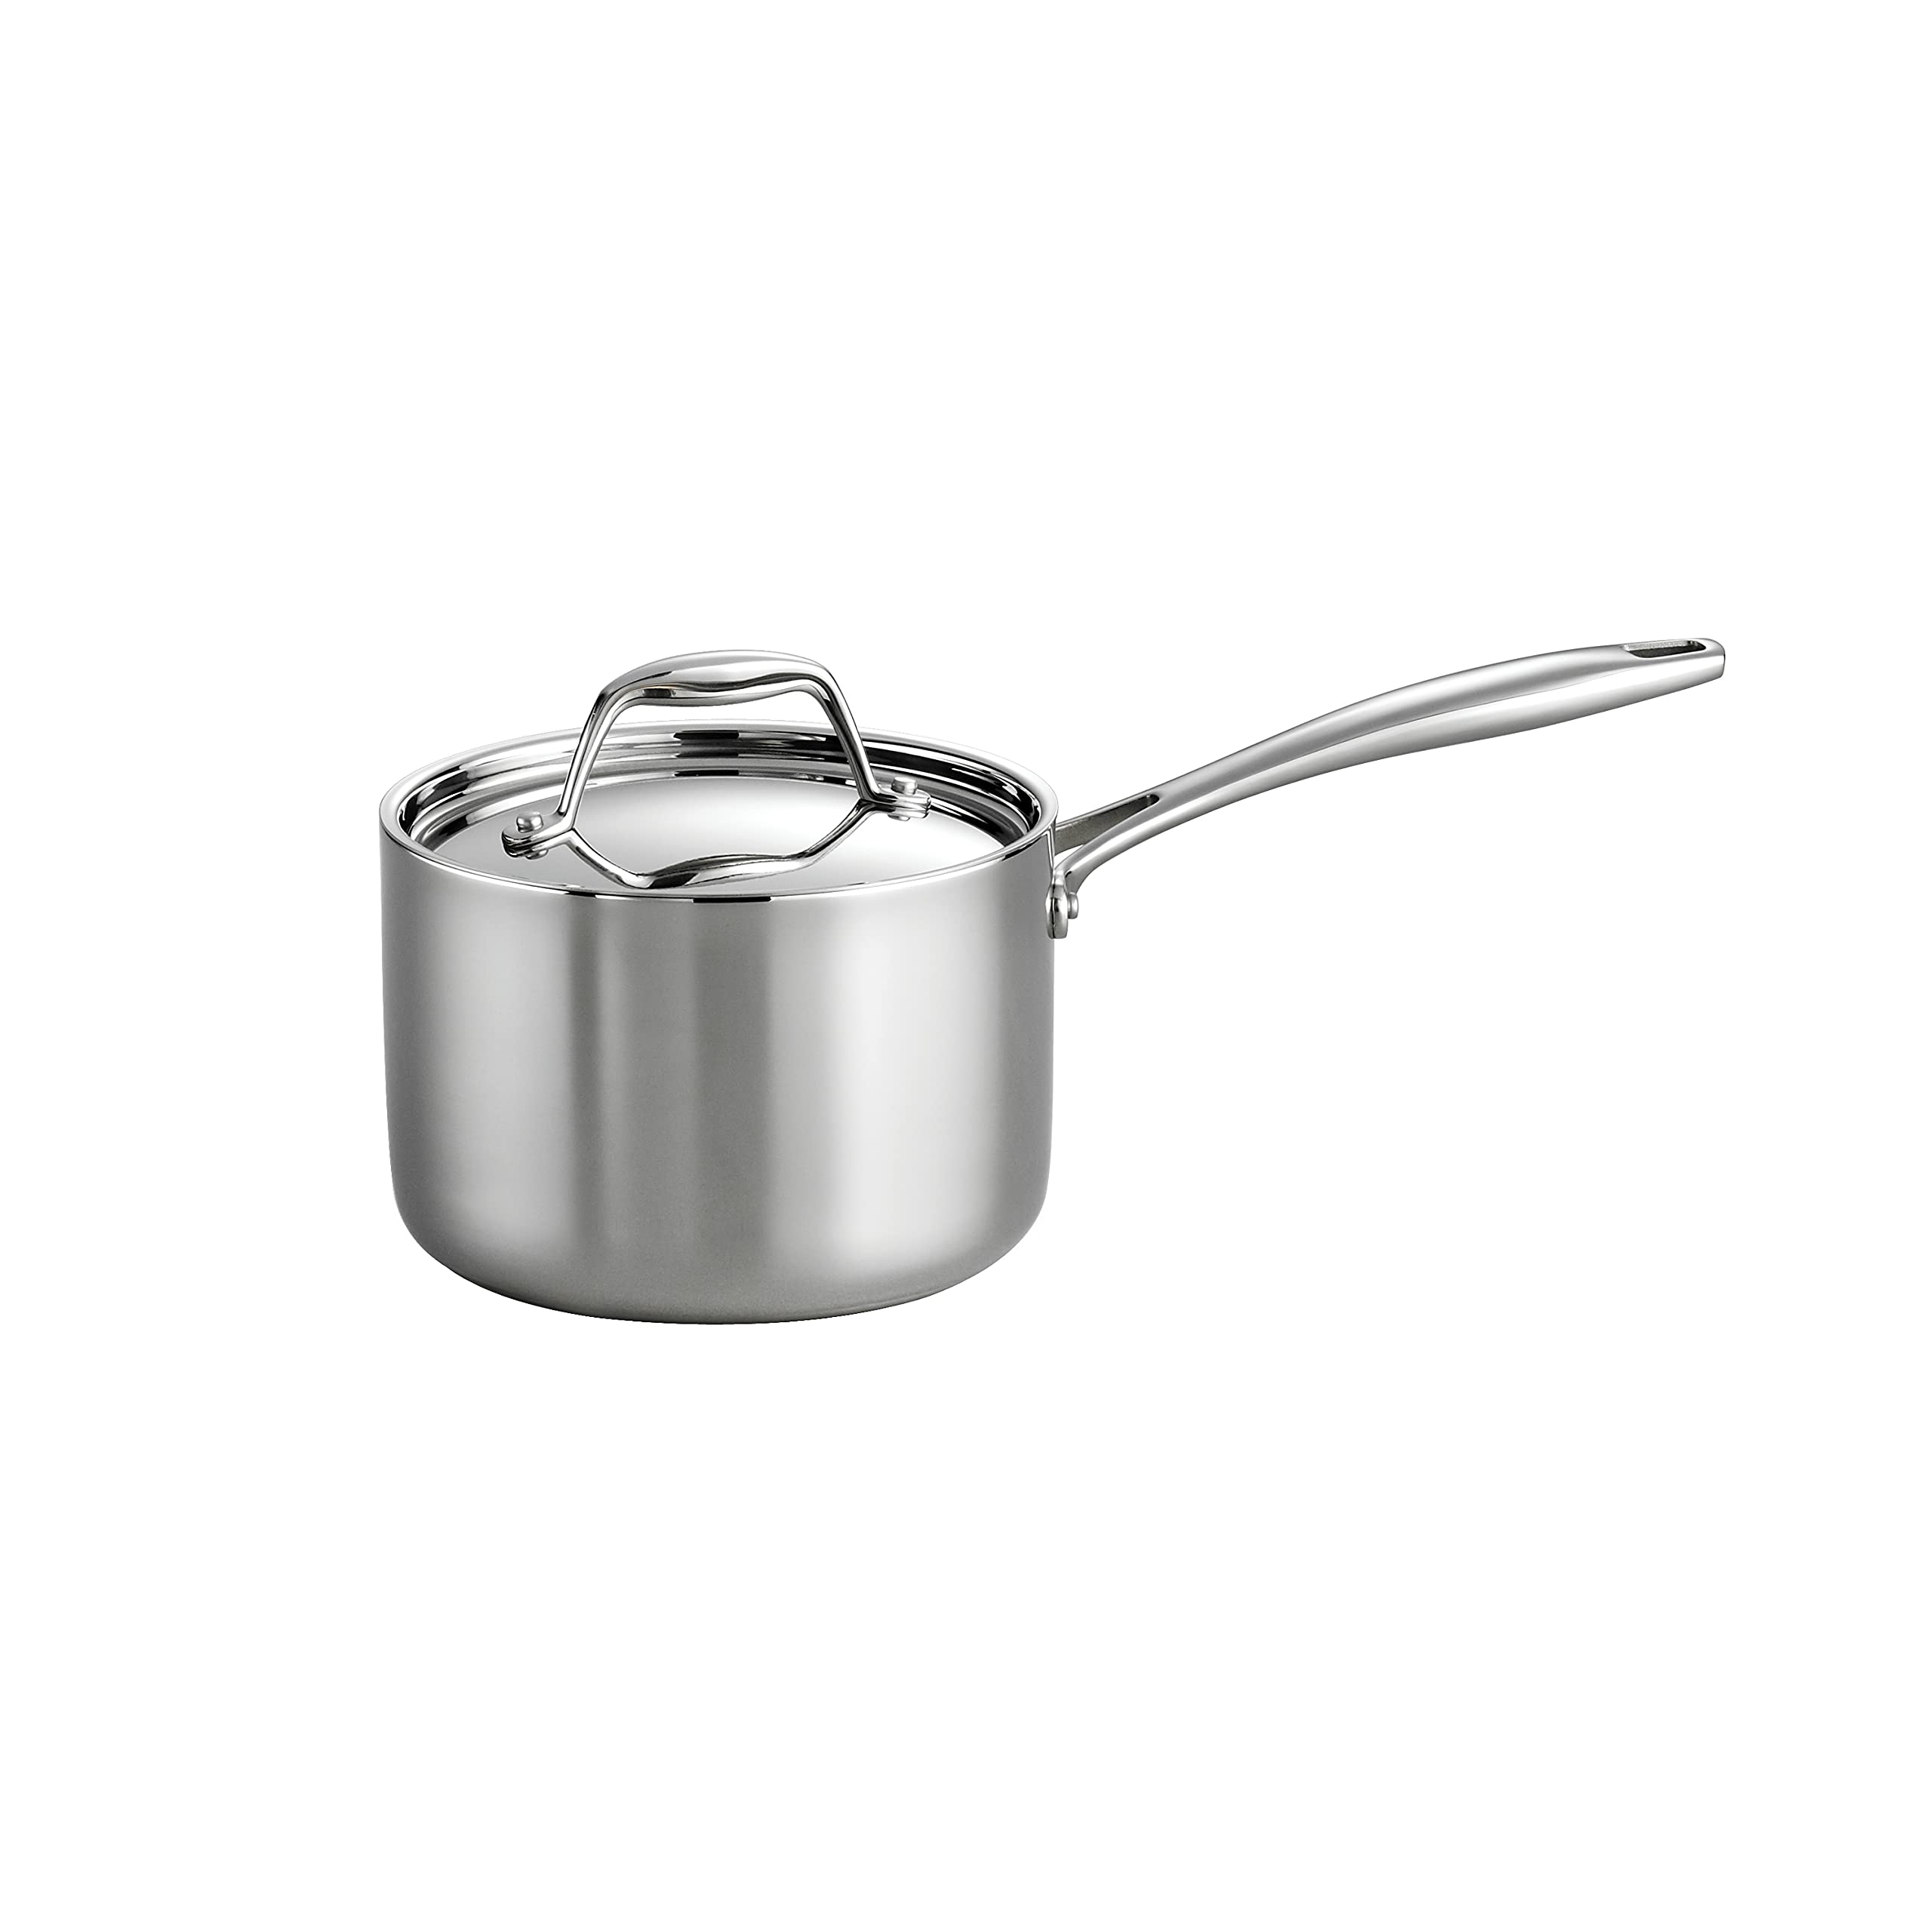 Tramontina covered Sauce Pan Stainless Steel Tri-Ply clad 2 Qt, 80116022DS